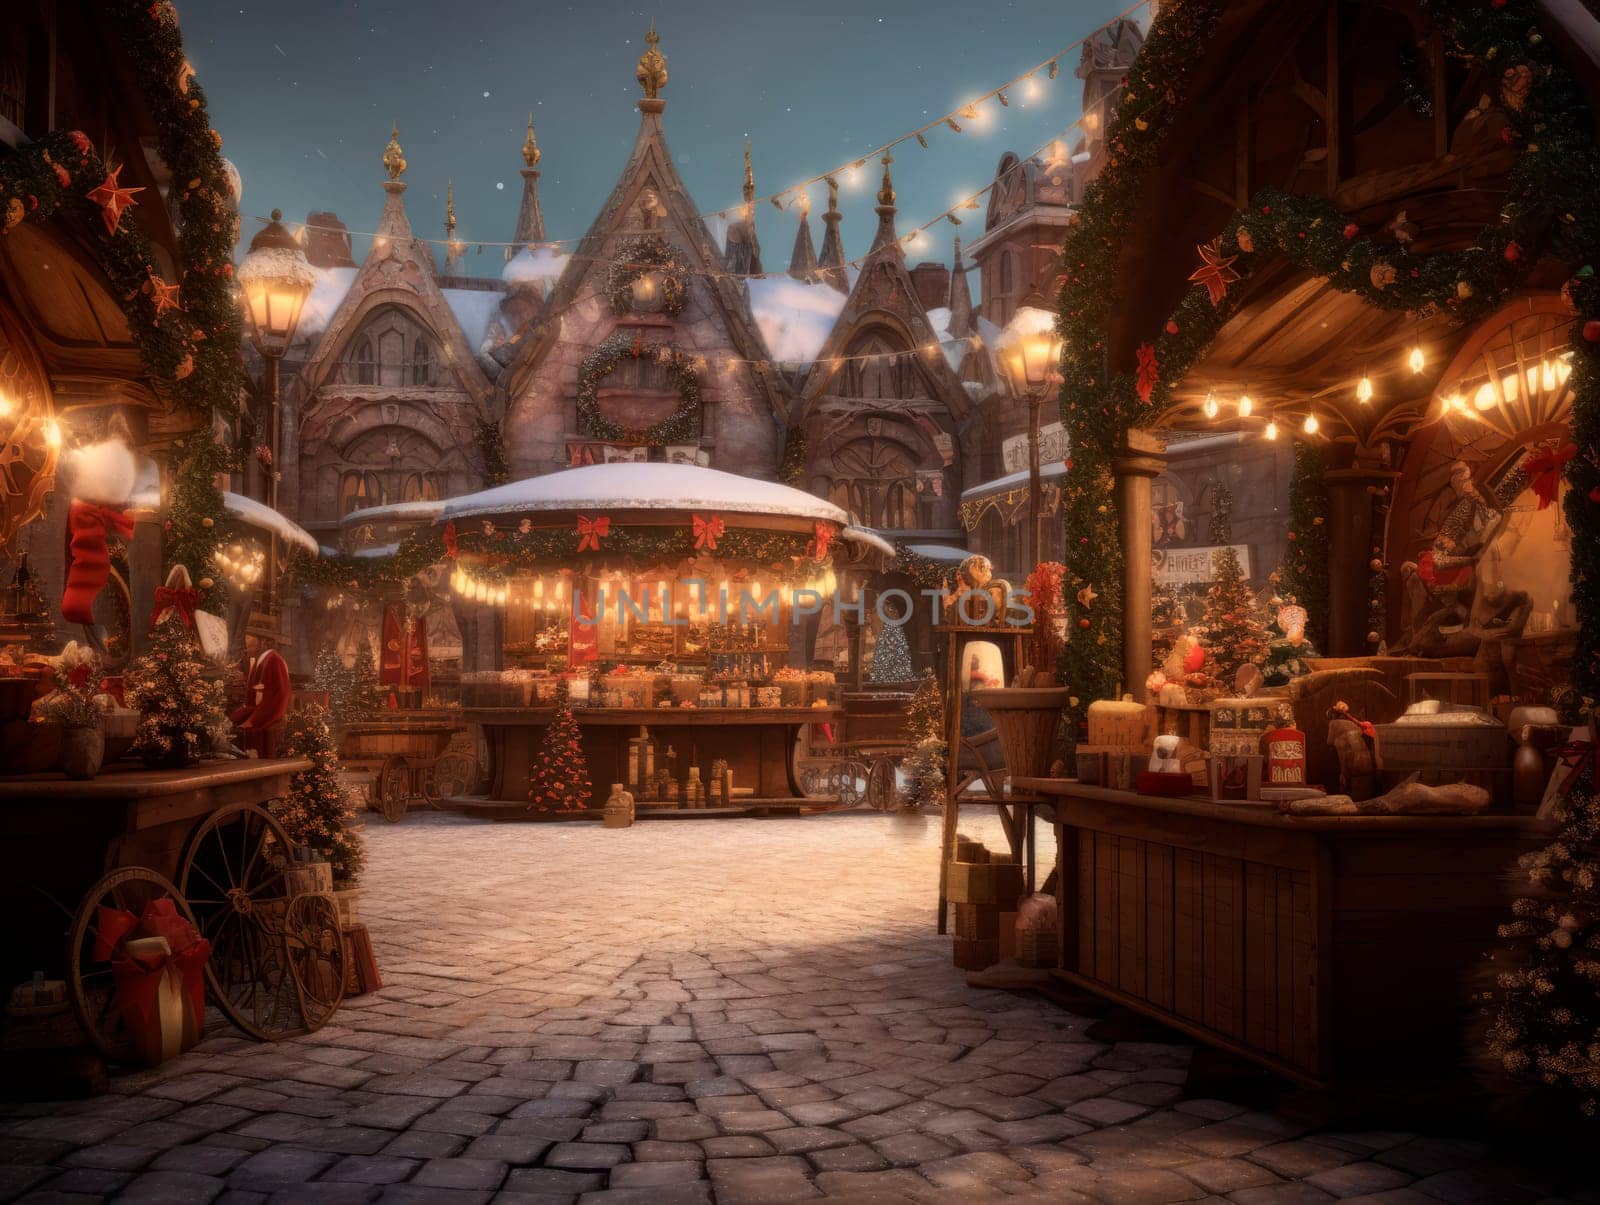 Christmas market in the evening, illuminated by lights by Spirina